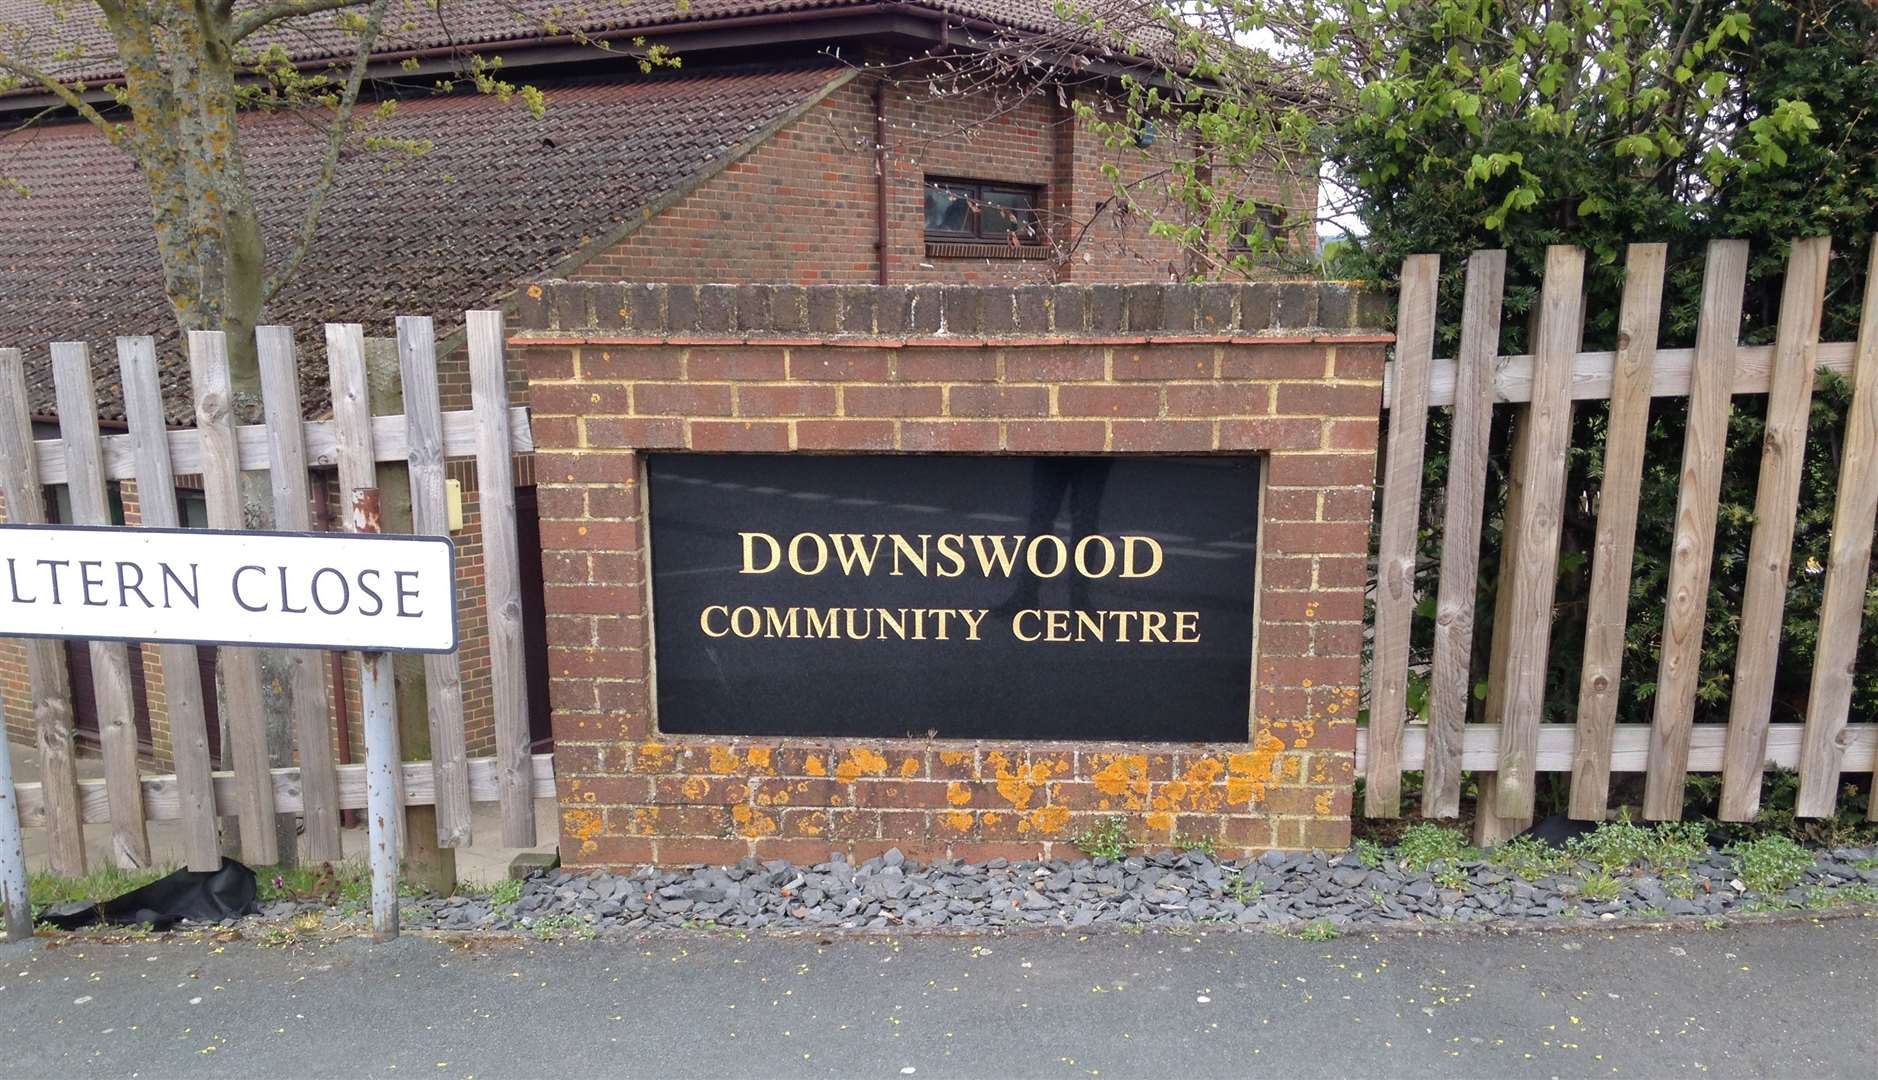 Downswood Community Centre